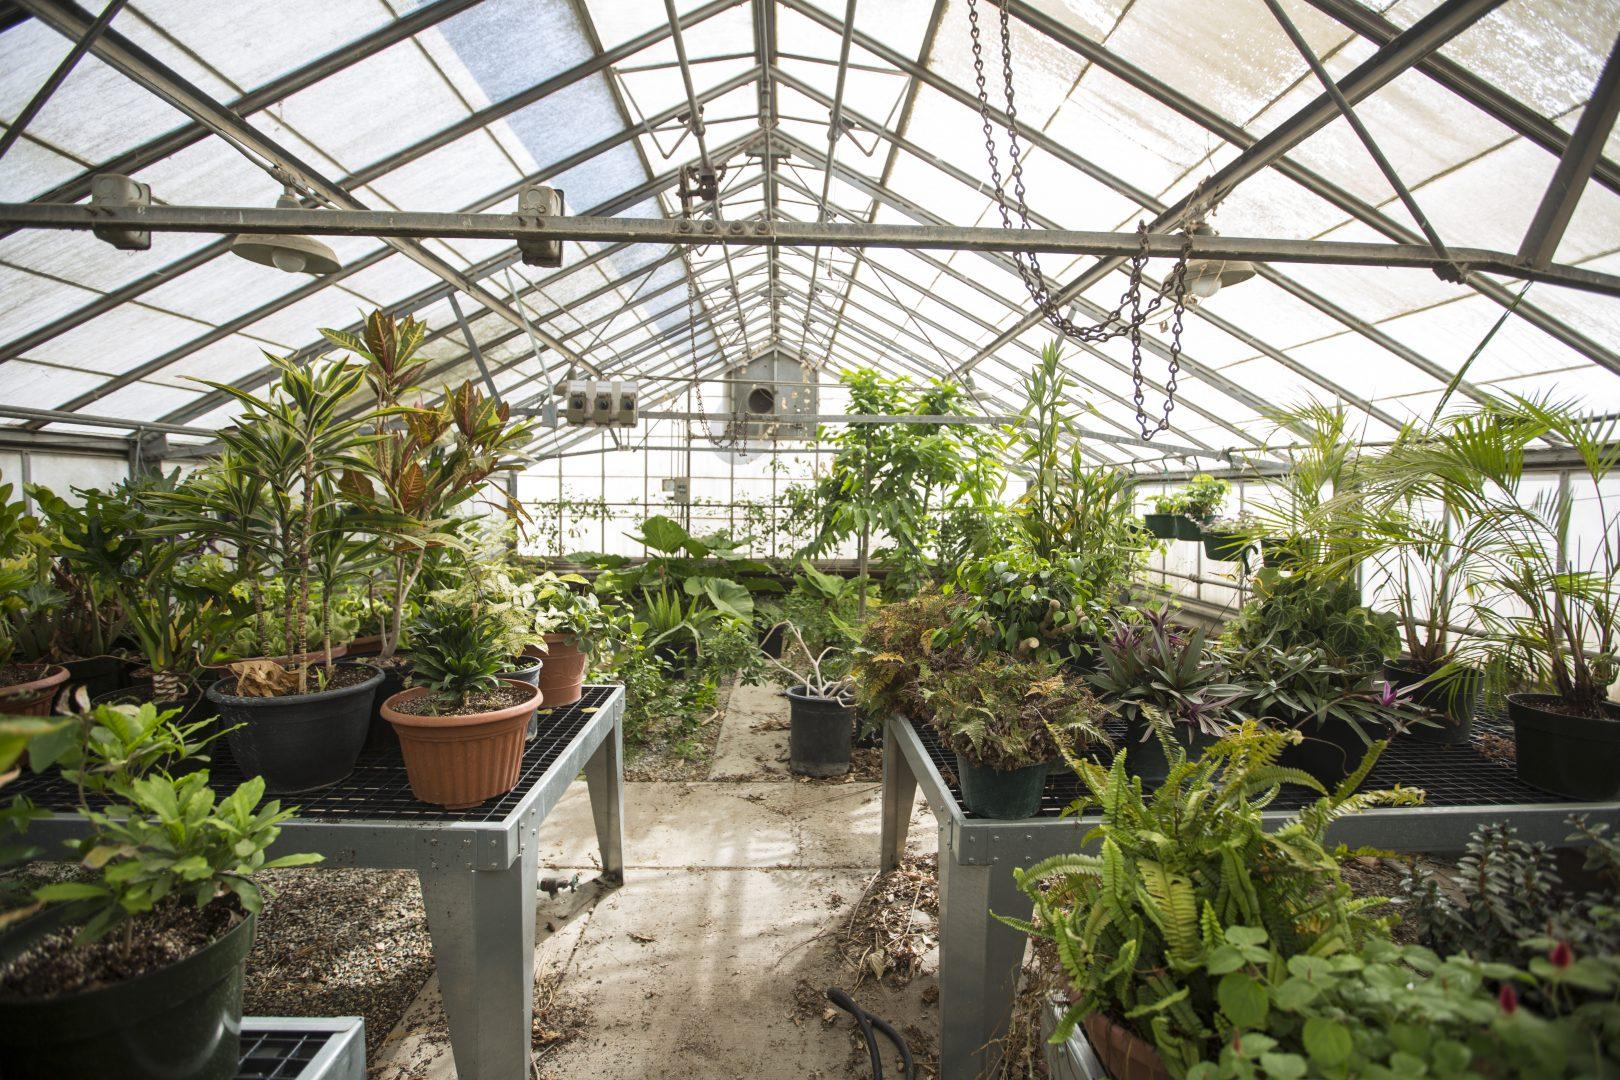 The misters inside this greenhouse refresh the plants inside one of the horticulture greenhouses on Oct. 9. The misters go off every minute or so to keep plants hydrated. (Daniel Avalos/The Collegian)